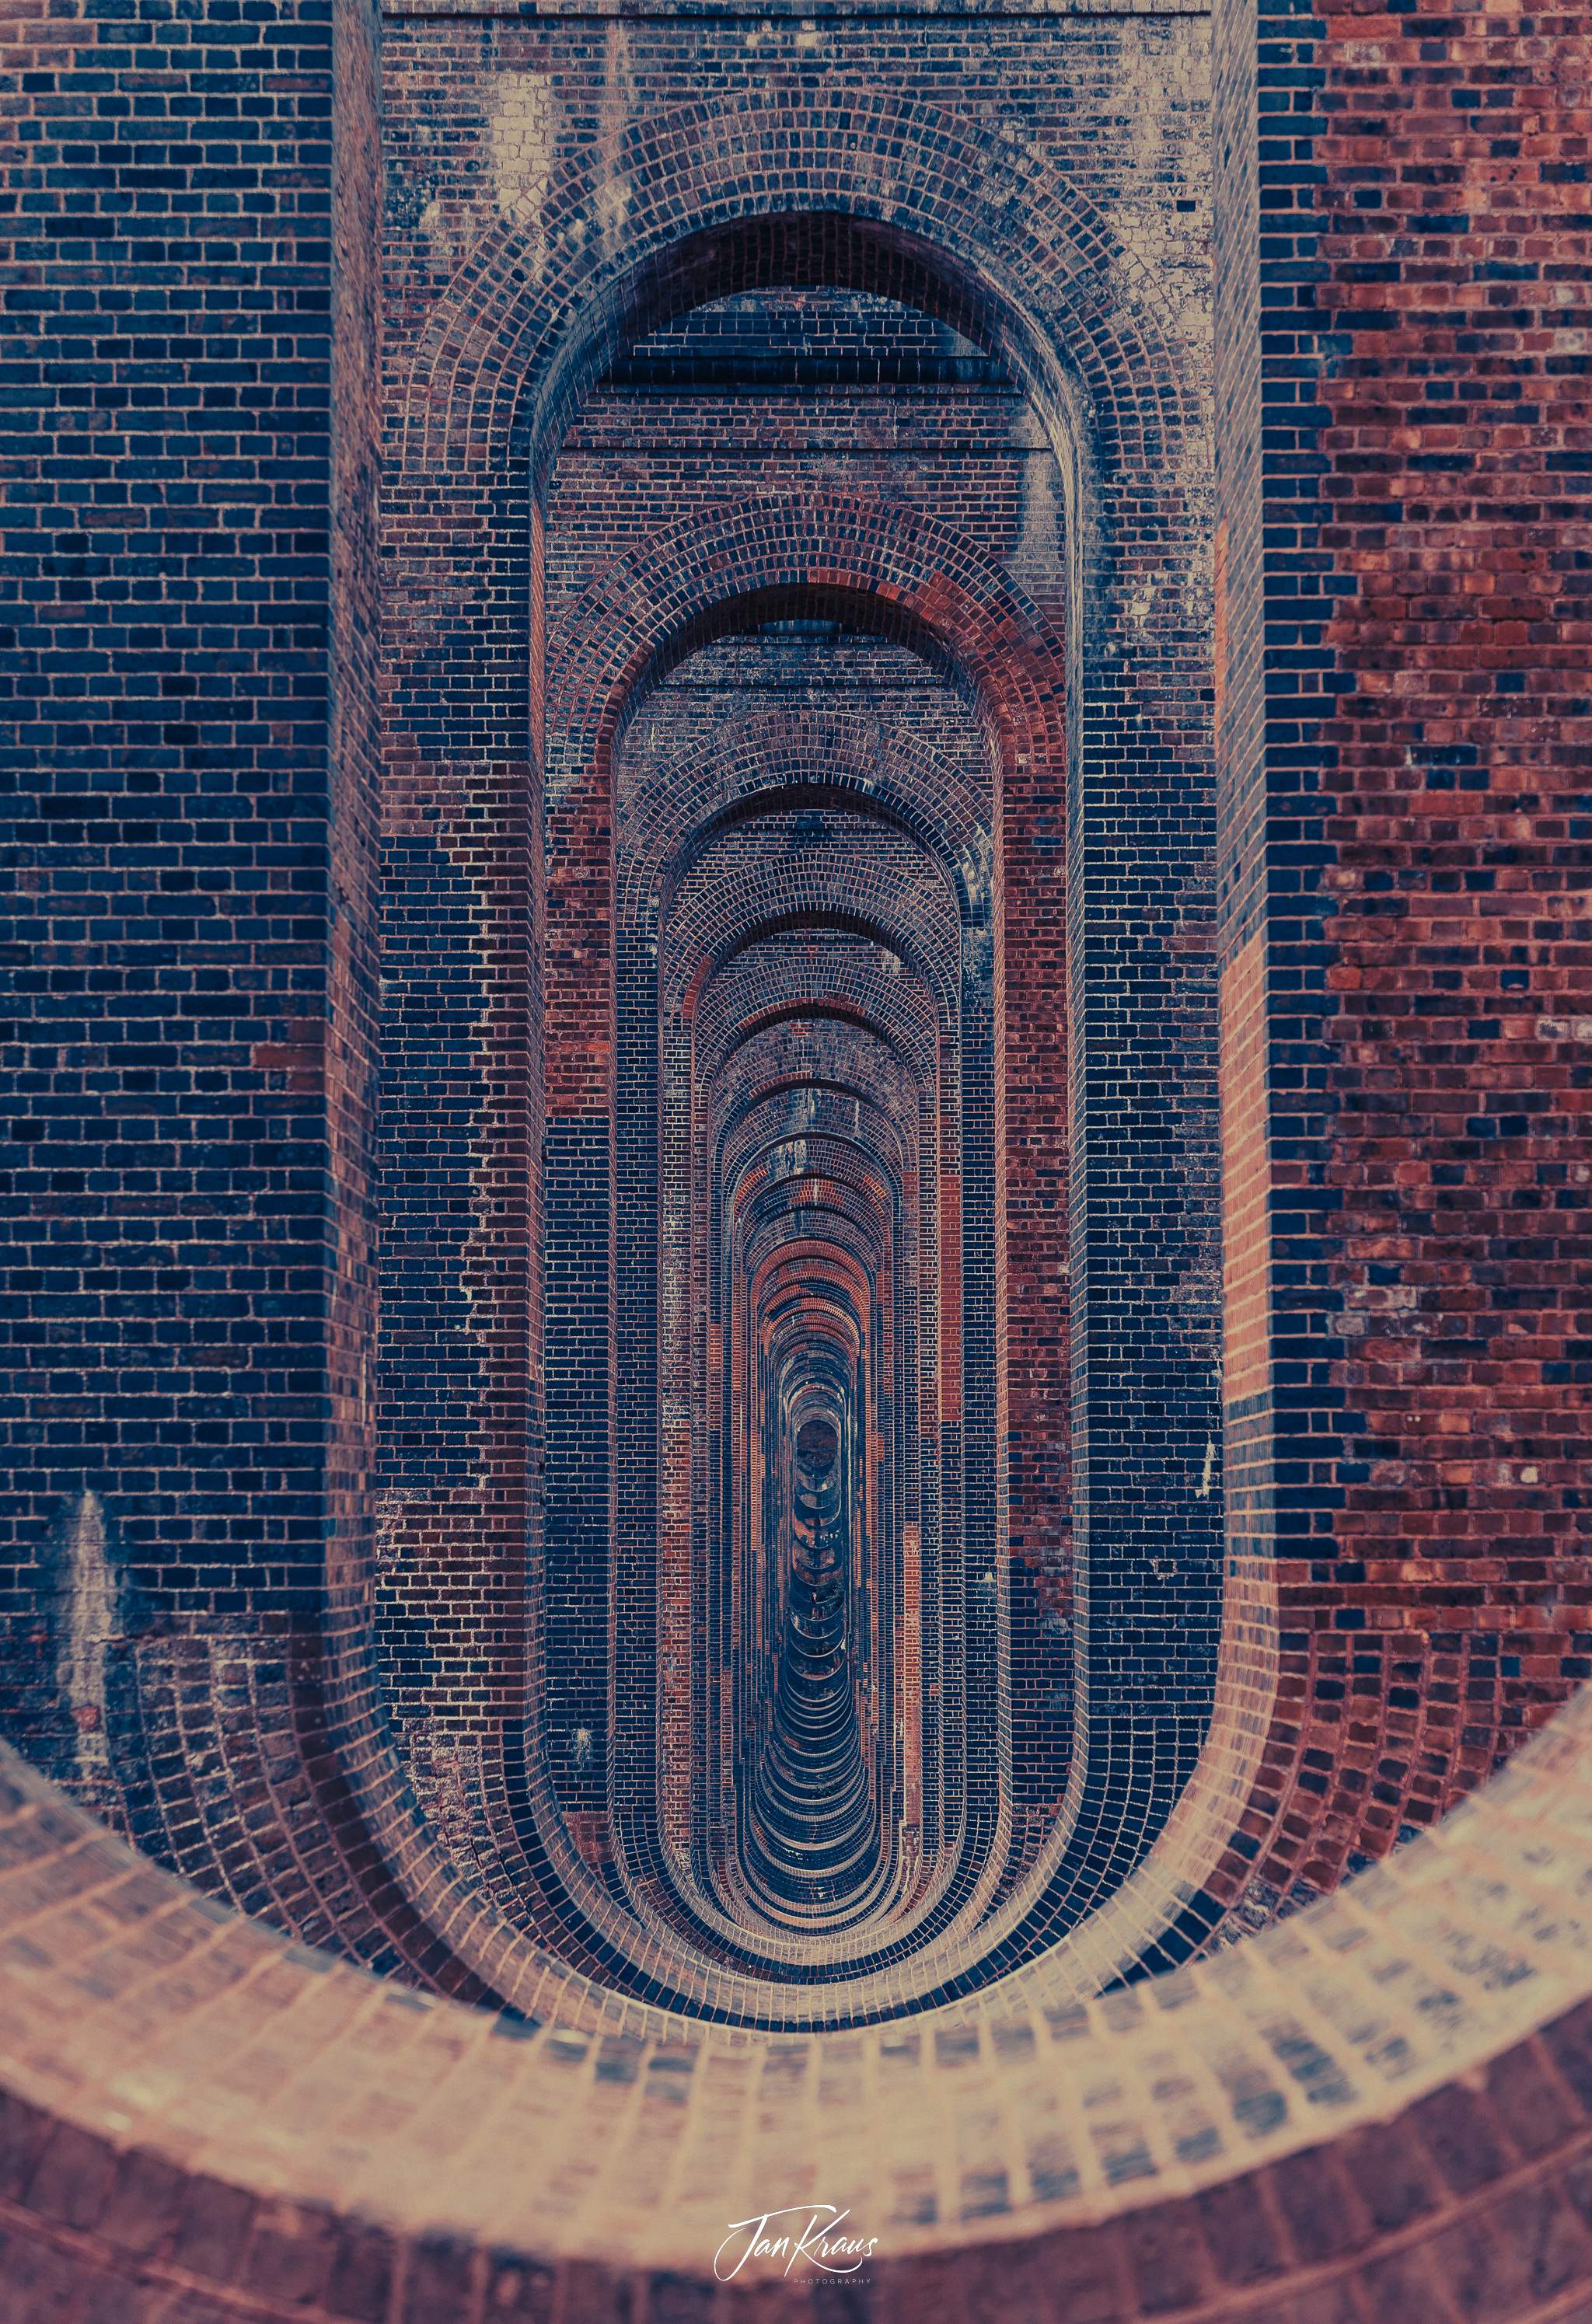 The Ouse Valley Viaduct, Sussex, England, UK